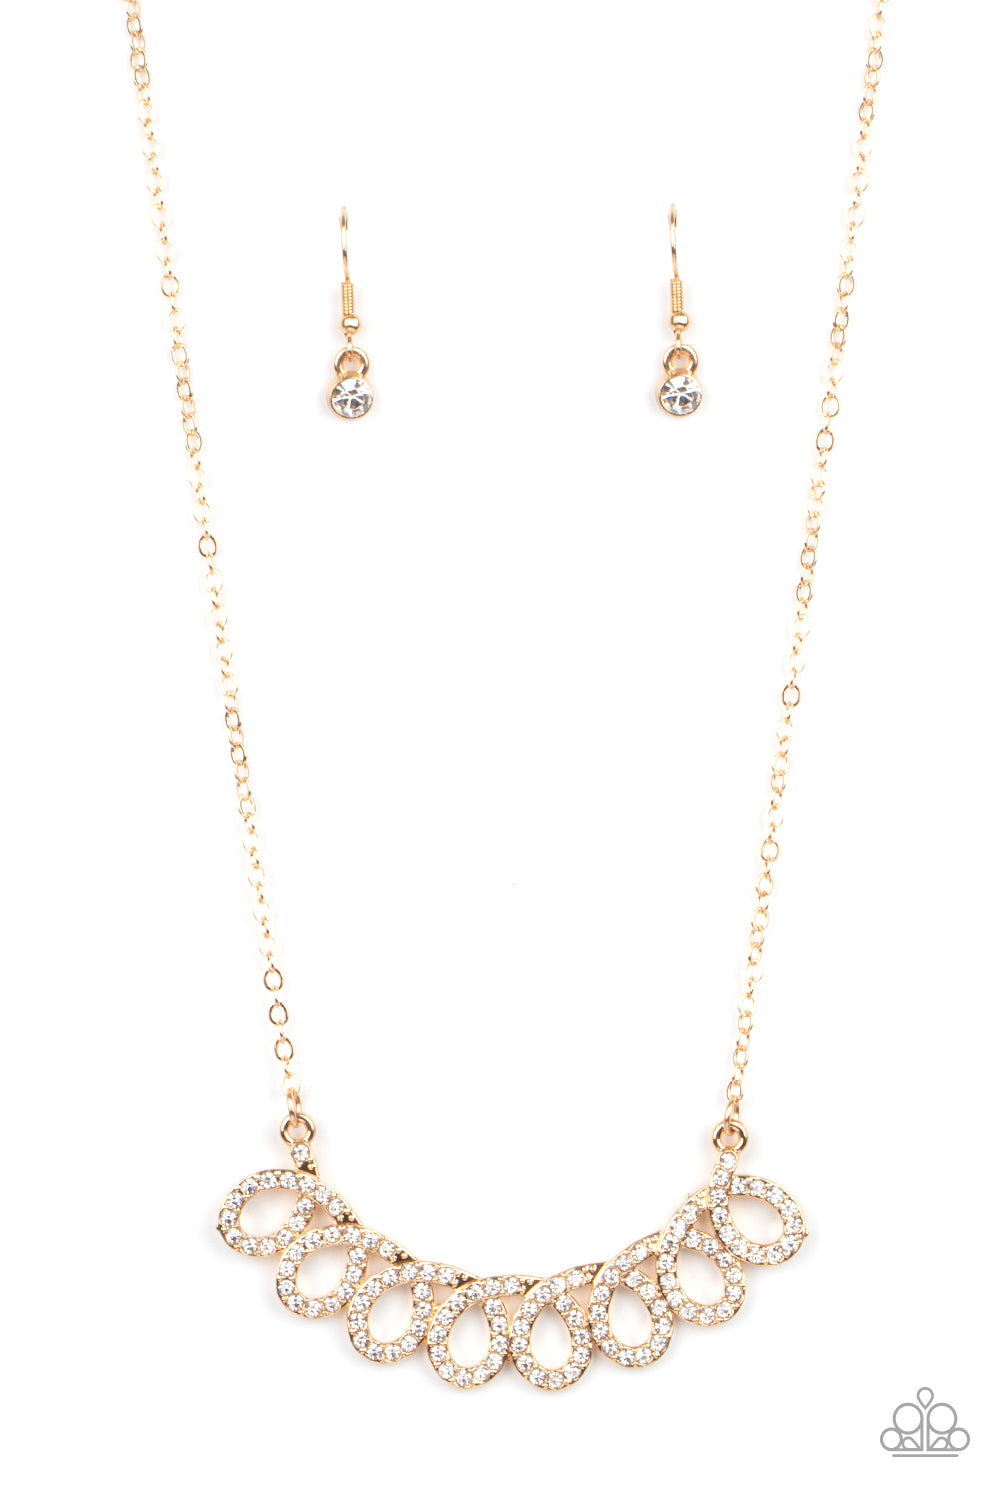 Paparazzi Timeless Trimmings Gold Short Necklace